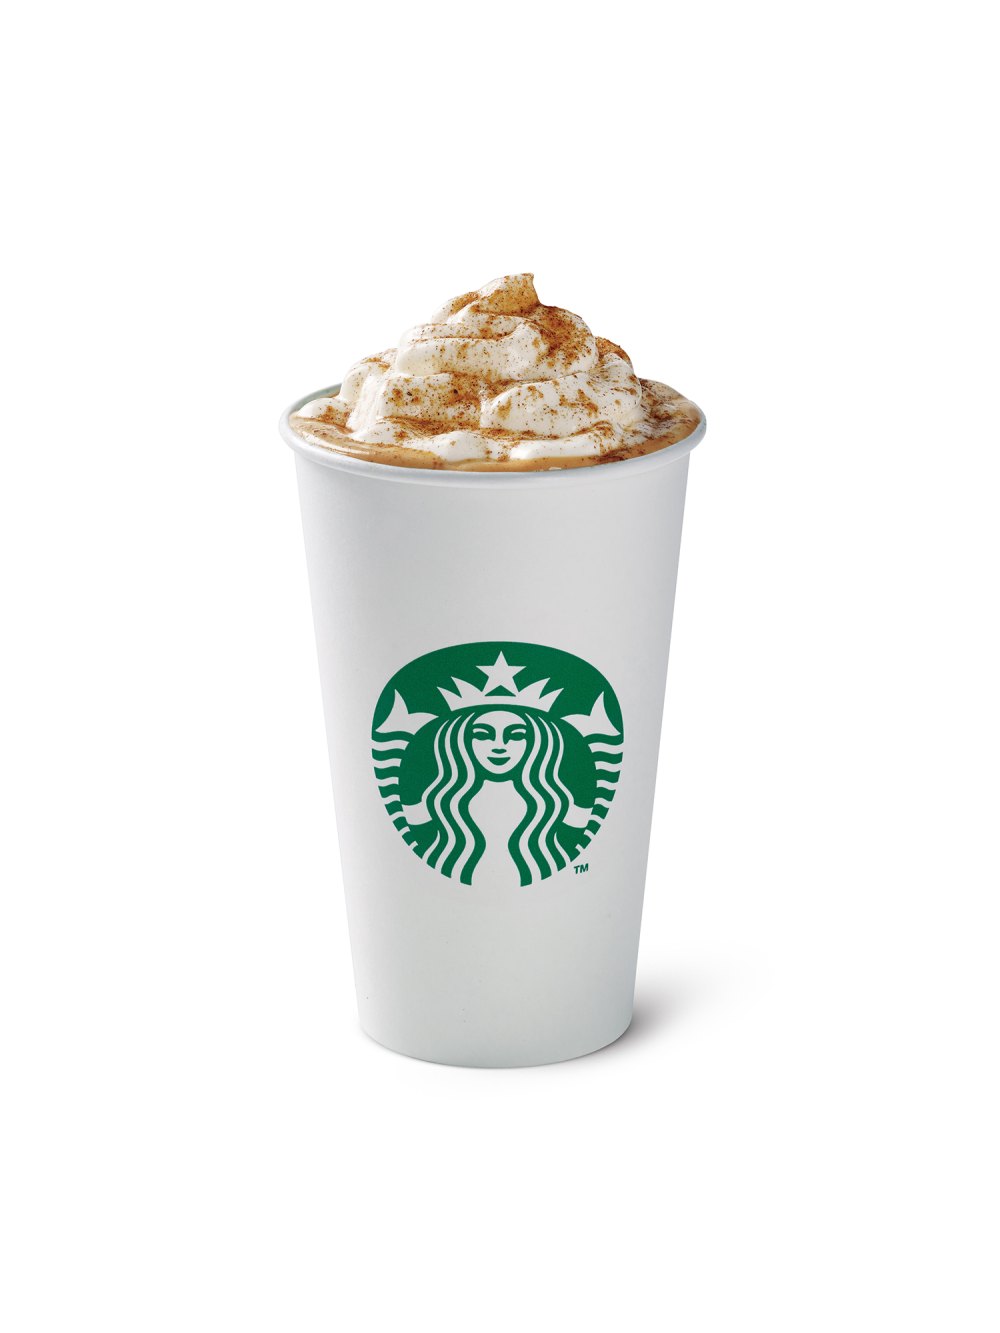 Social Media Reacts to the August 28th Return of the Pumpkin Spice Latte